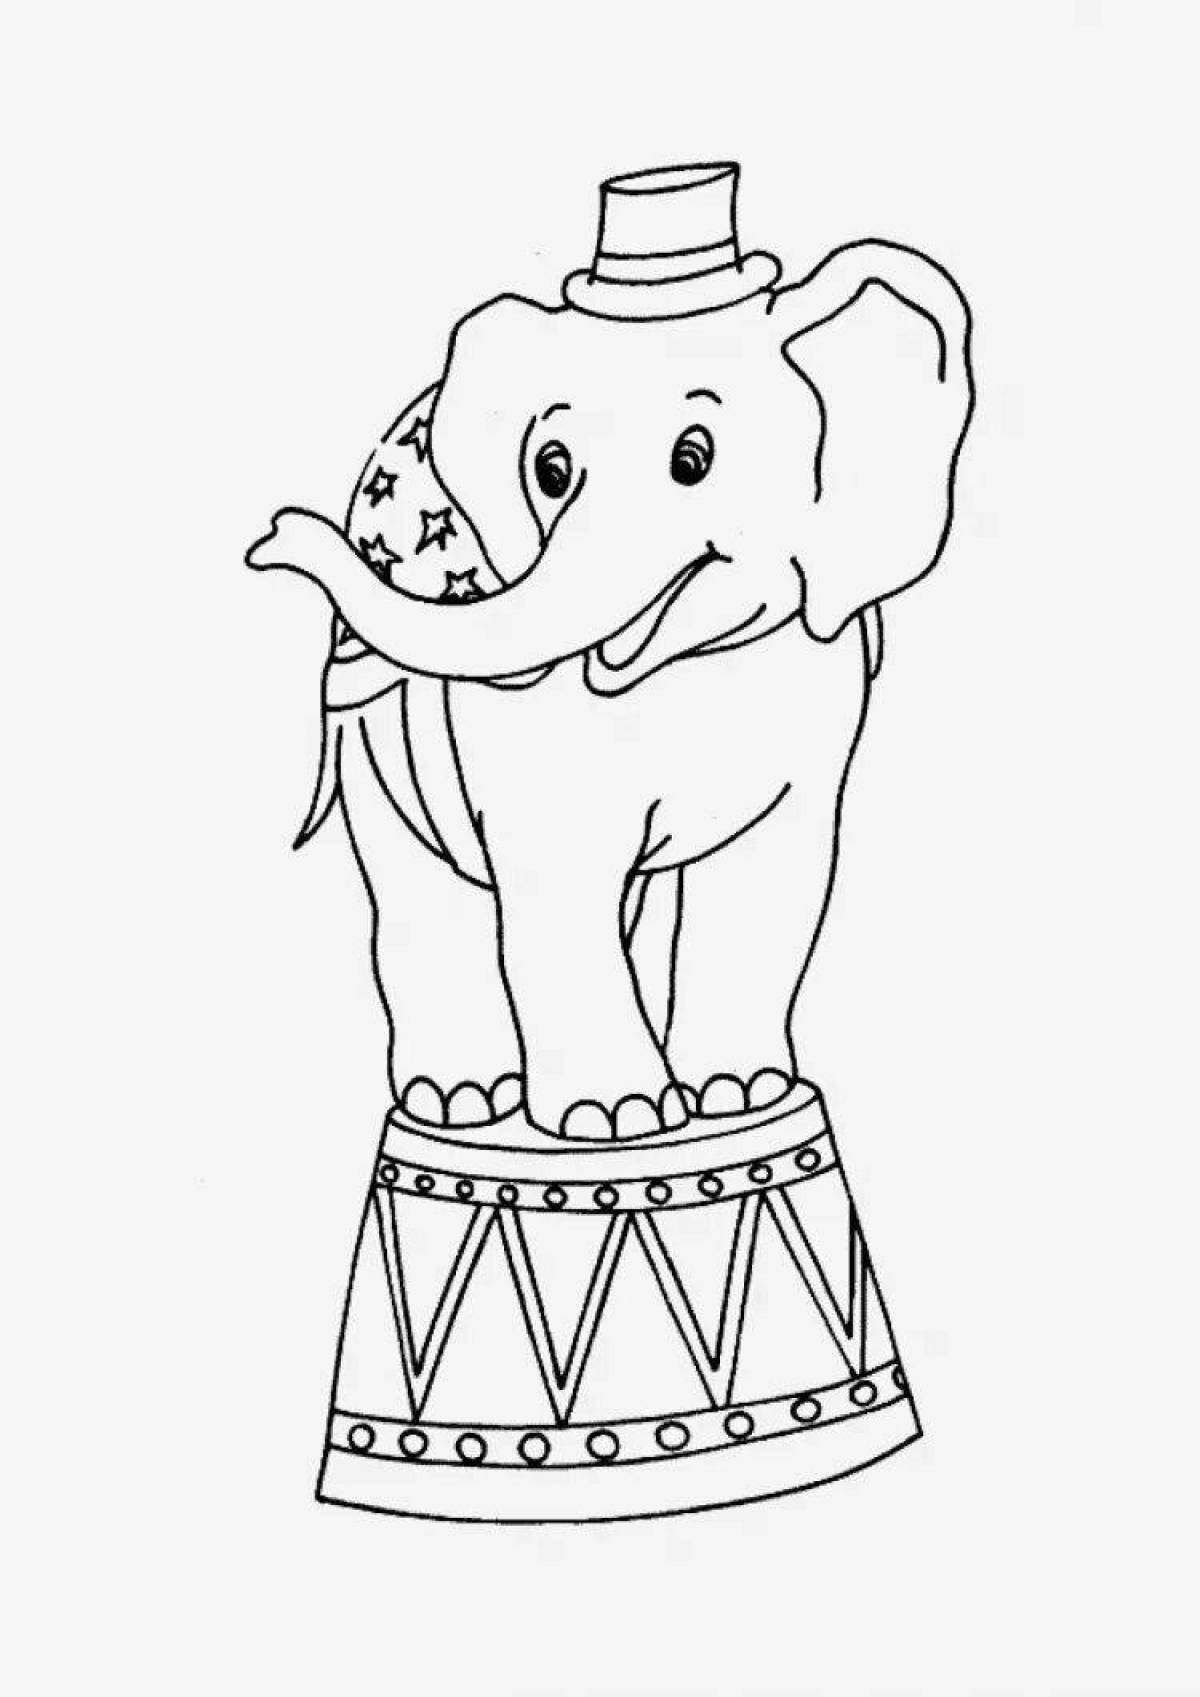 Colorful circus elephant coloring page